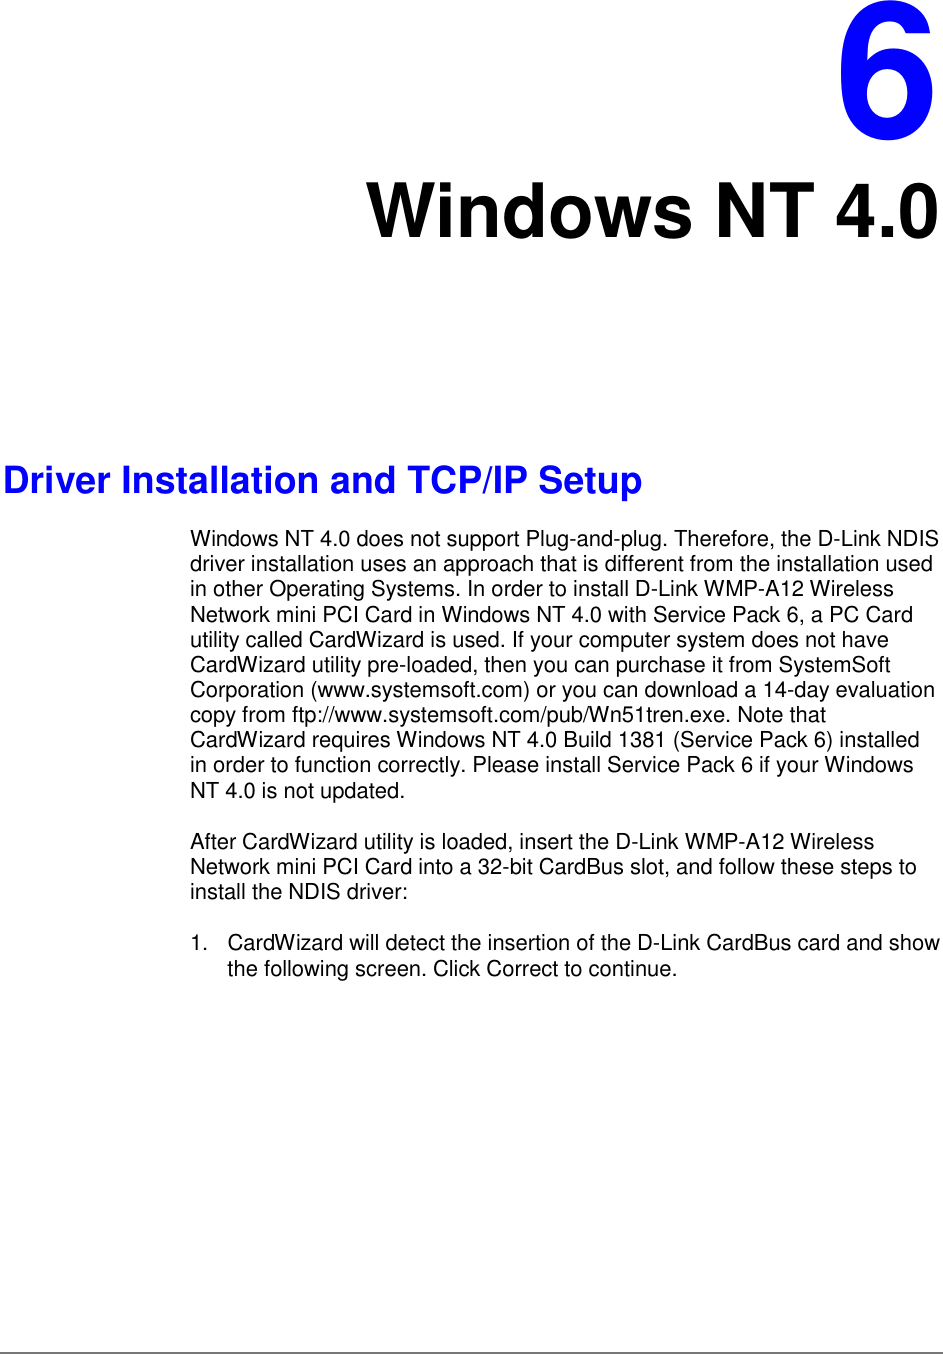 6Windows NT 4.0Driver Installation and TCP/IP SetupWindows NT 4.0 does not support Plug-and-plug. Therefore, the D-Link NDISdriver installation uses an approach that is different from the installation usedin other Operating Systems. In order to install D-Link WMP-A12 WirelessNetwork mini PCI Card in Windows NT 4.0 with Service Pack 6, a PC Cardutility called CardWizard is used. If your computer system does not haveCardWizard utility pre-loaded, then you can purchase it from SystemSoftCorporation (www.systemsoft.com) or you can download a 14-day evaluationcopy from ftp://www.systemsoft.com/pub/Wn51tren.exe. Note thatCardWizard requires Windows NT 4.0 Build 1381 (Service Pack 6) installedin order to function correctly. Please install Service Pack 6 if your WindowsNT 4.0 is not updated.After CardWizard utility is loaded, insert the D-Link WMP-A12 WirelessNetwork mini PCI Card into a 32-bit CardBus slot, and follow these steps toinstall the NDIS driver:1.  CardWizard will detect the insertion of the D-Link CardBus card and showthe following screen. Click Correct to continue.